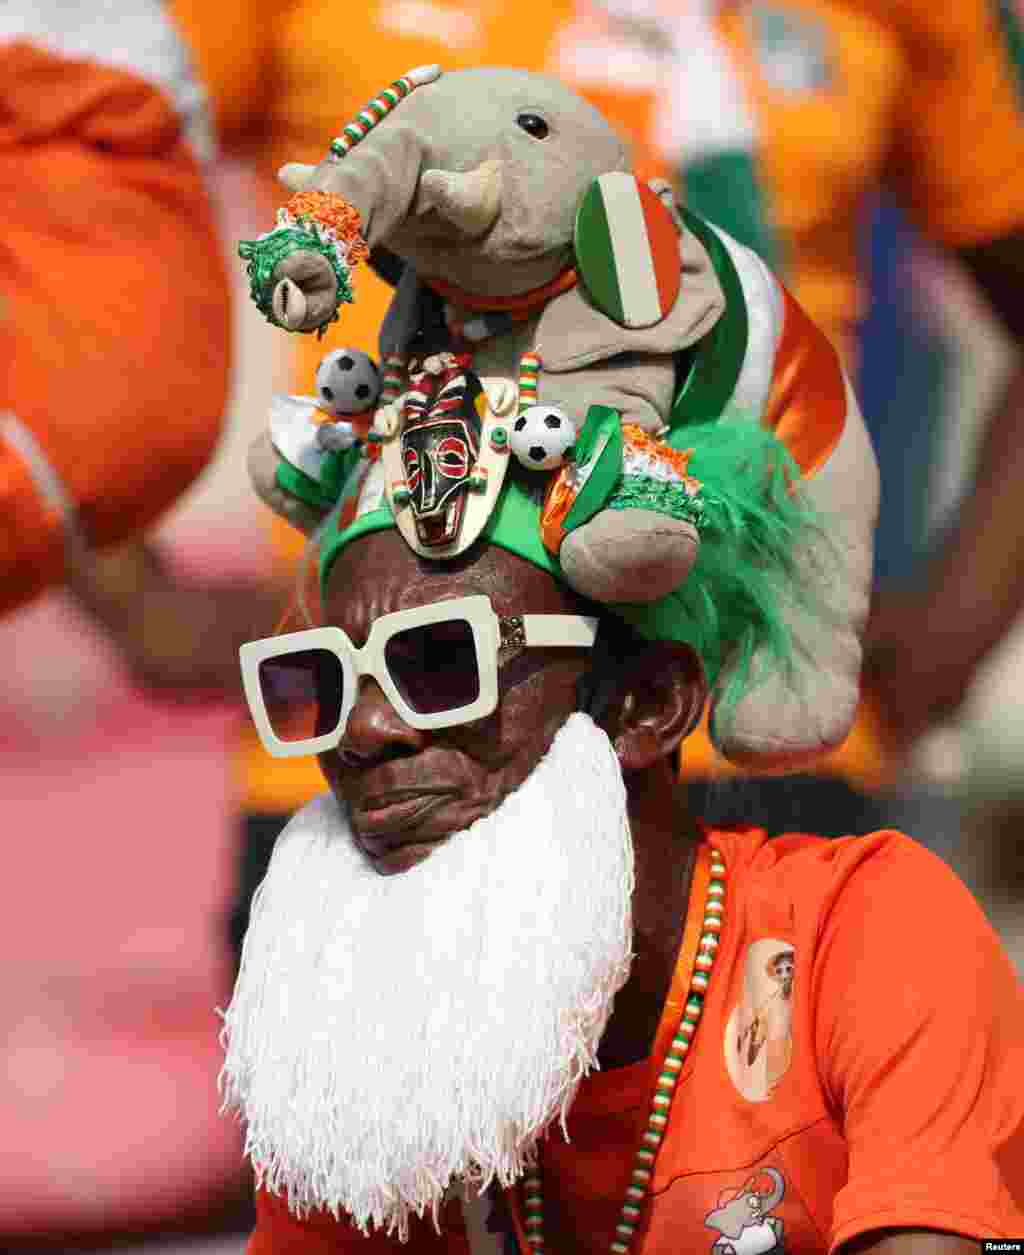 Ivory Coast fan in the stands before the match against Egypt in Cameroon, Jan. 26, 2022.